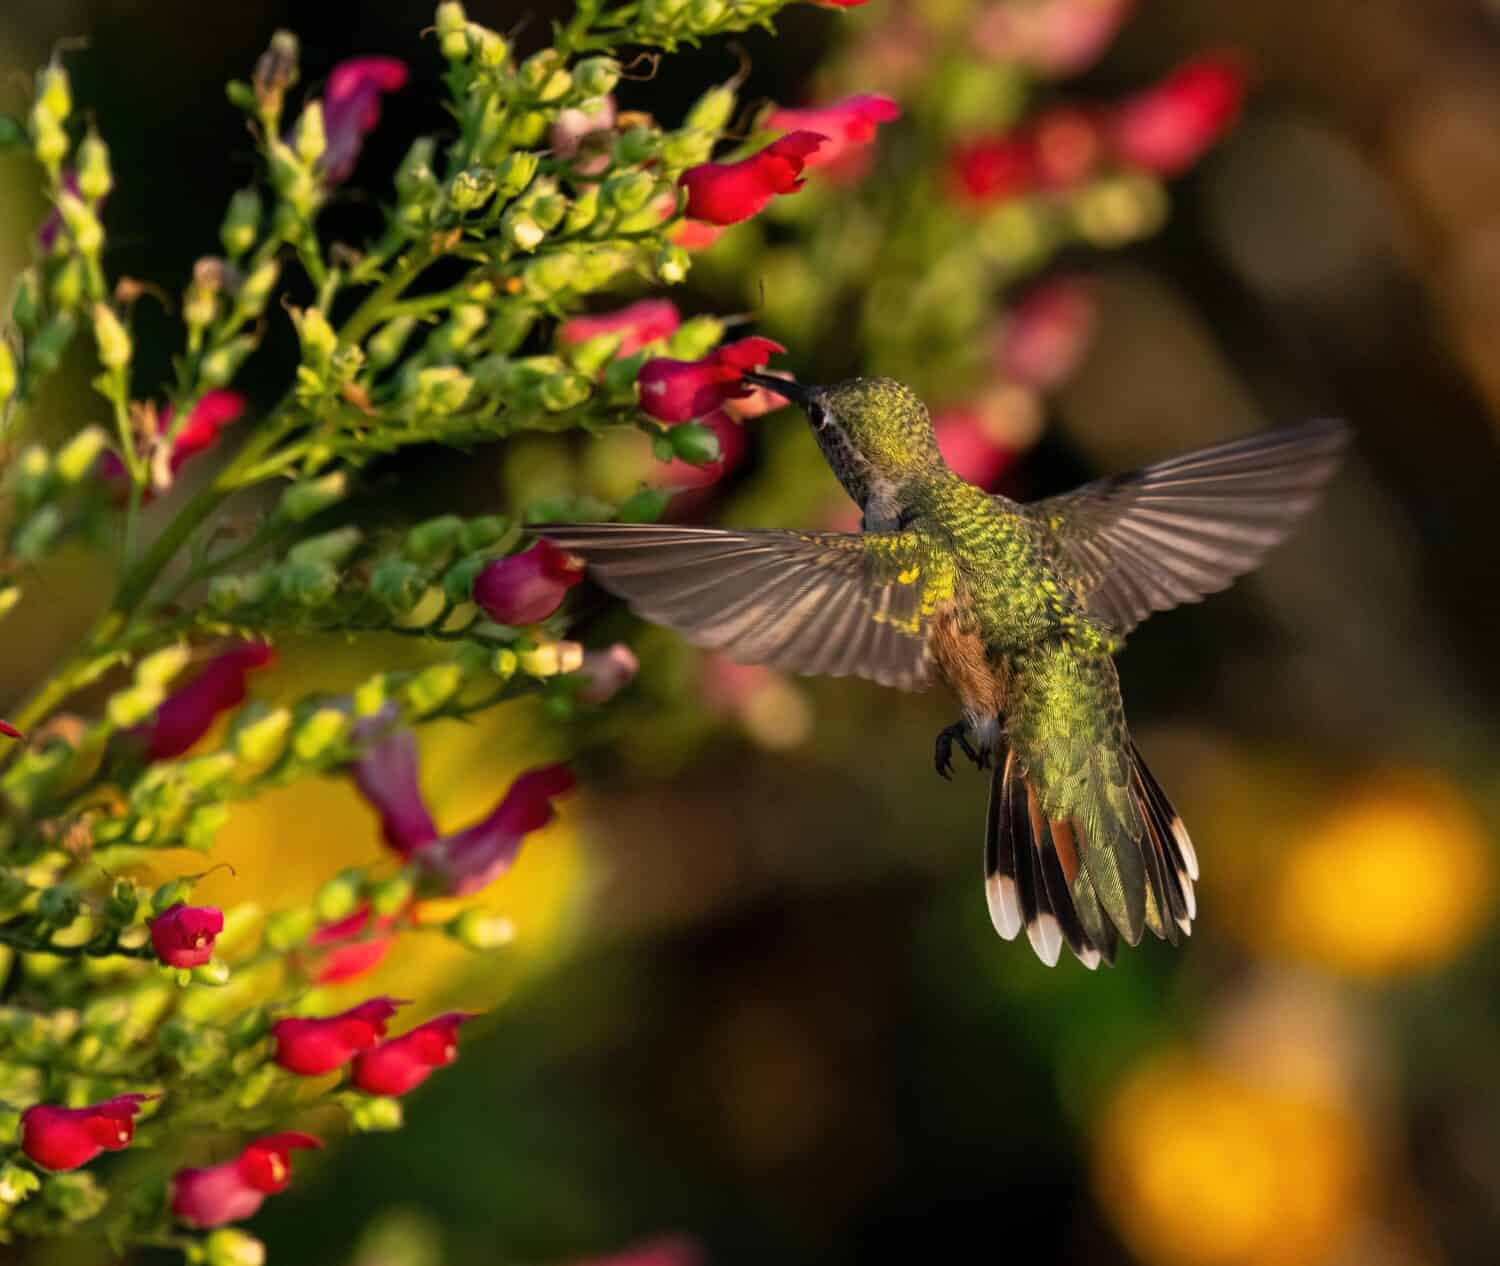 The backside of a female Broad-tailed hummingbird with open wings and fanned tail pollinating in a colorful garden setting.